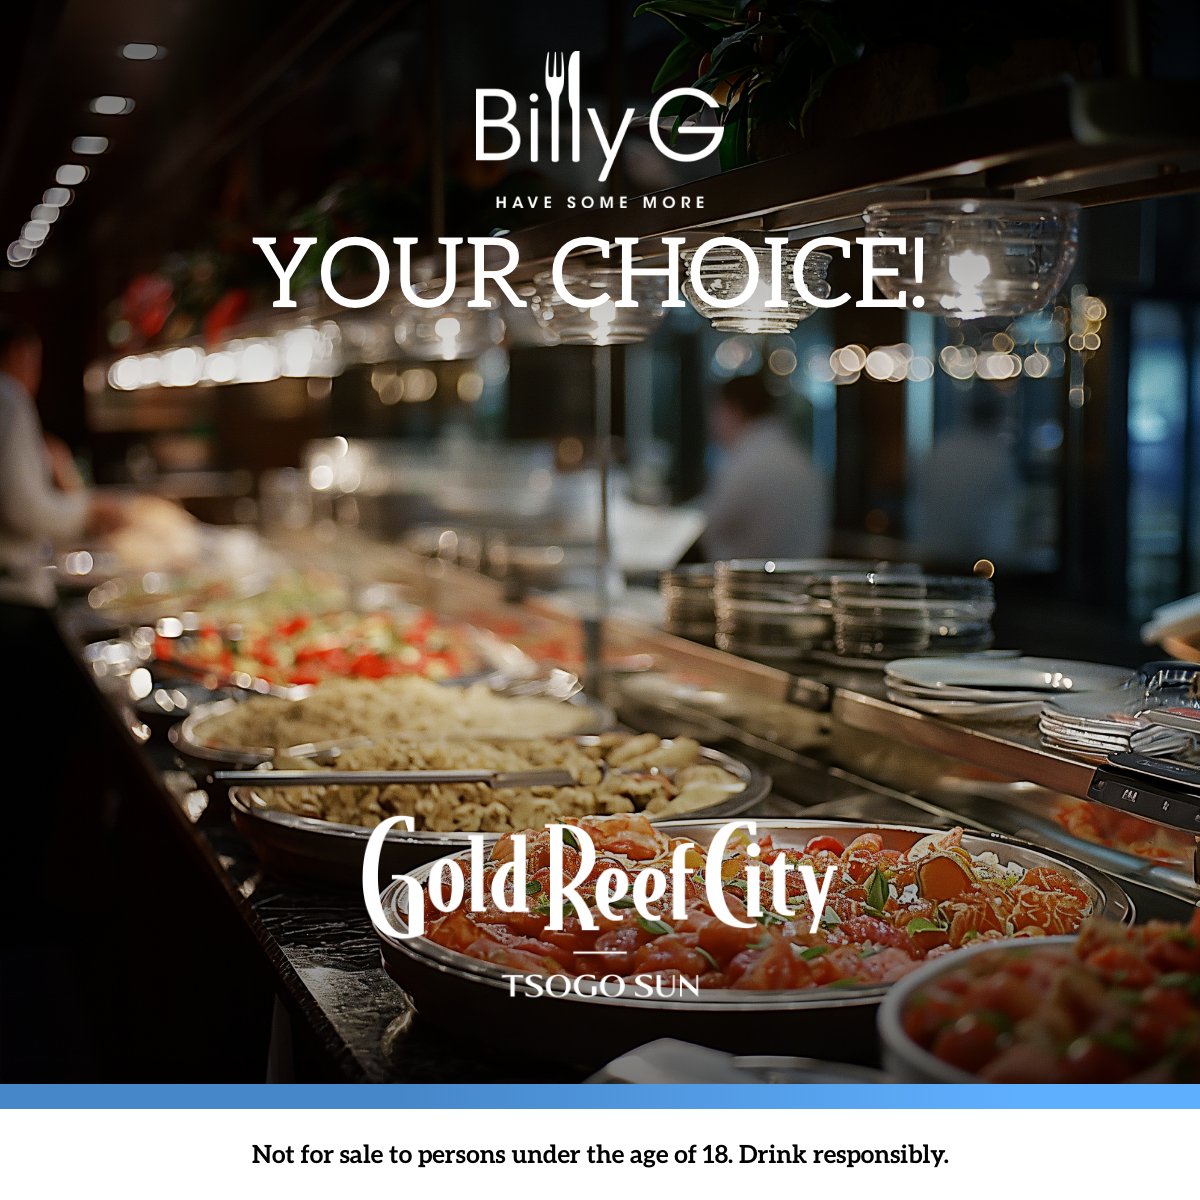 Indulge at Billy G’s buffet! This February, savour all your favourites guilt-free. It’s the month of love—treat yourself to endless delights! Book now: 🍰😋💕 bit.ly/3tMUPvn